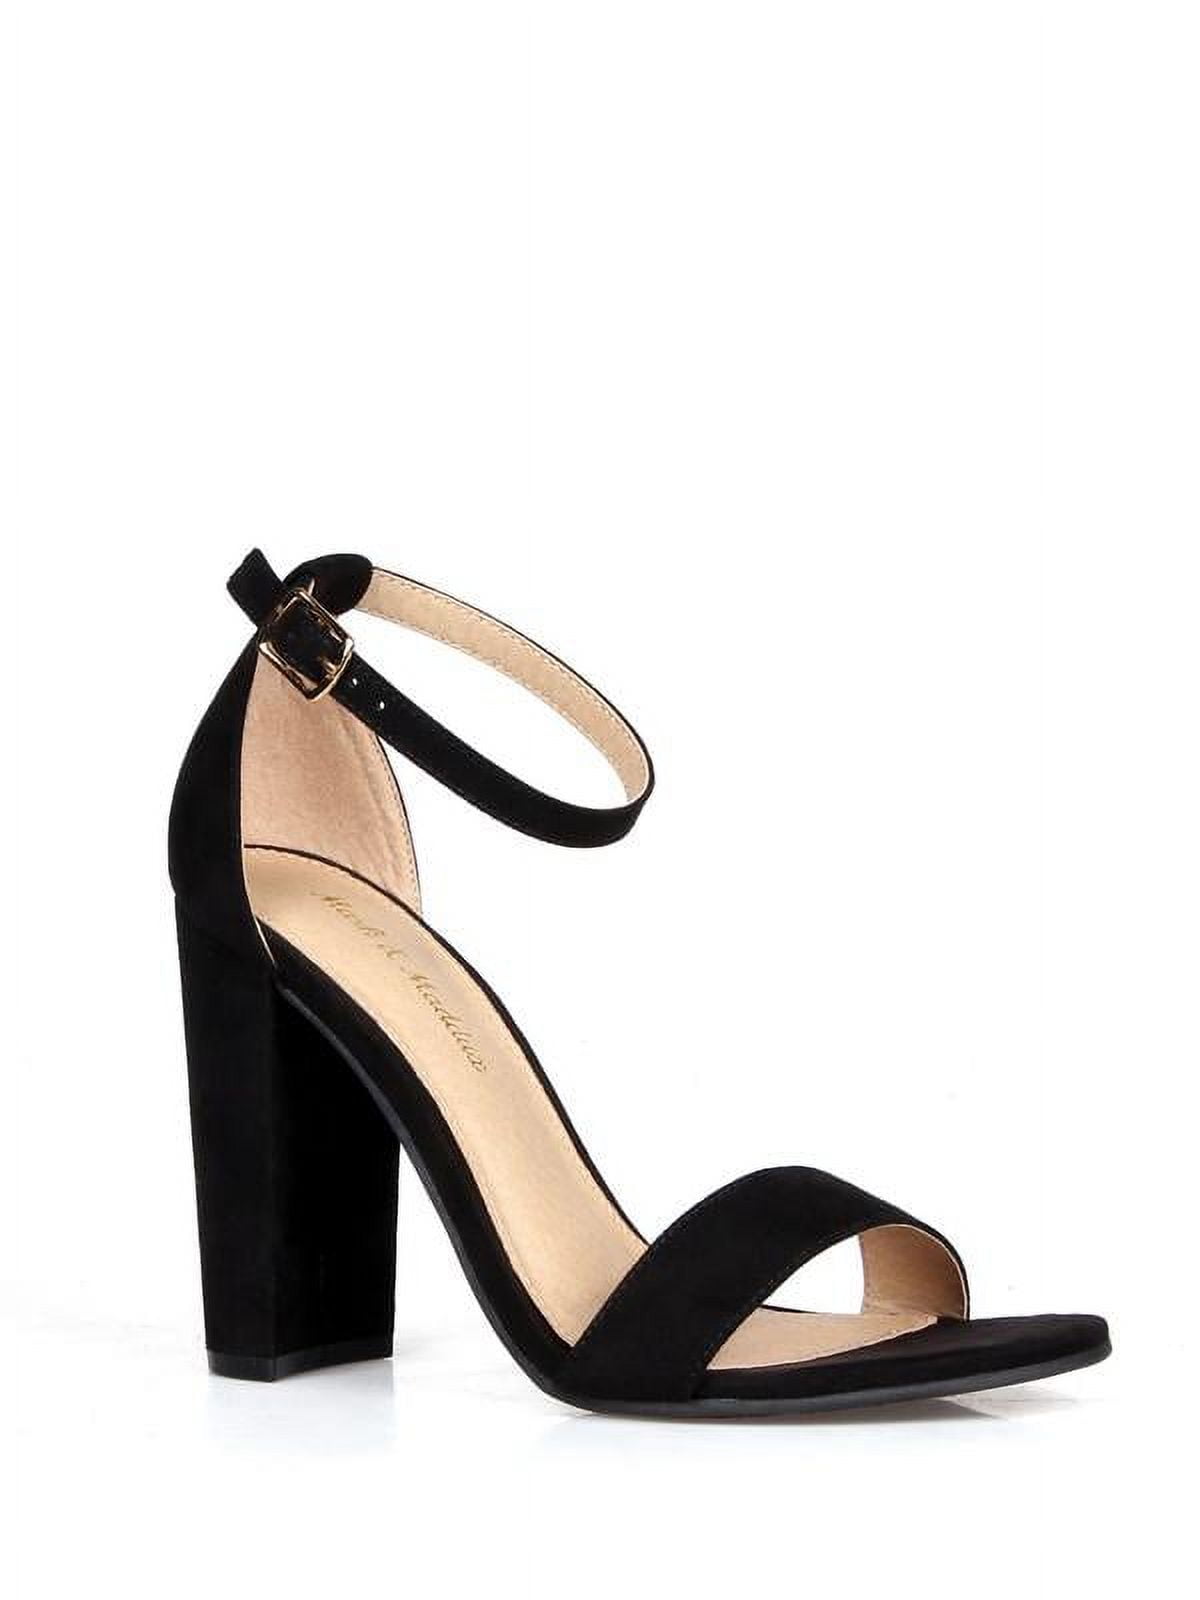 29 Most Comfortable Heels for a Stylish Work and Play Look